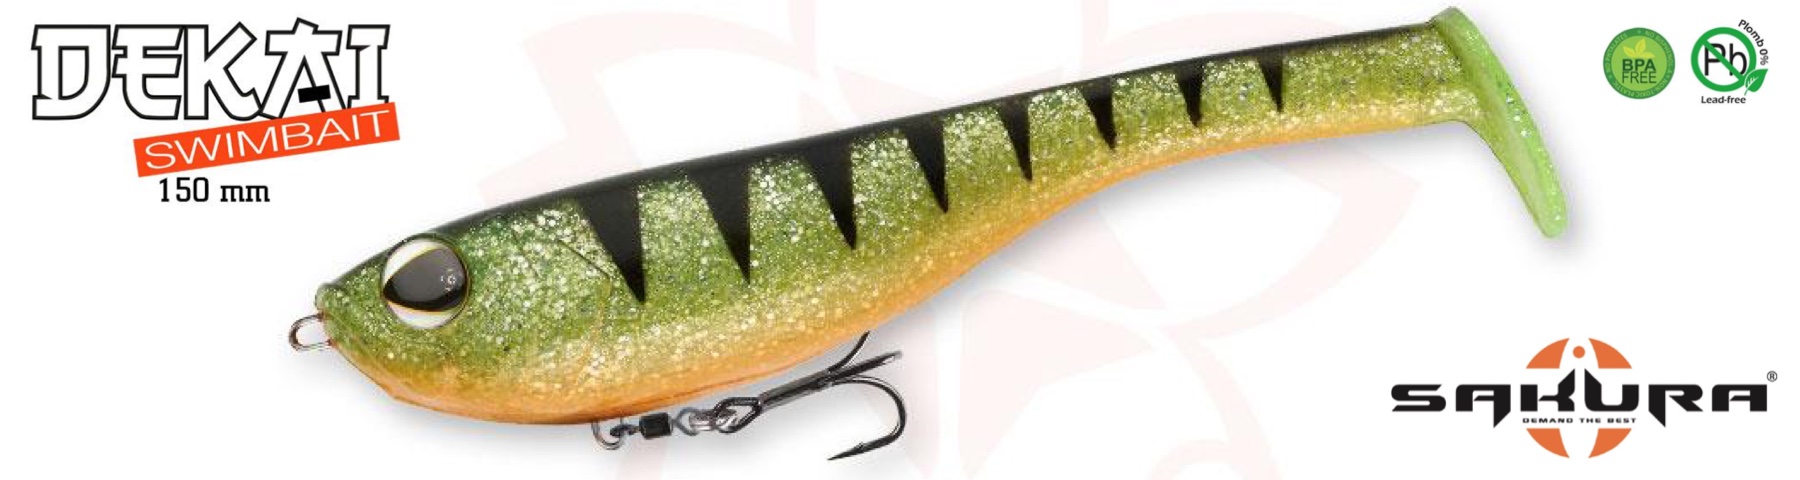 Fishing-Lure-Evolution, your web store that specializes in baits, rods,  reels, and all accessories for fishing lure, from well known brands.